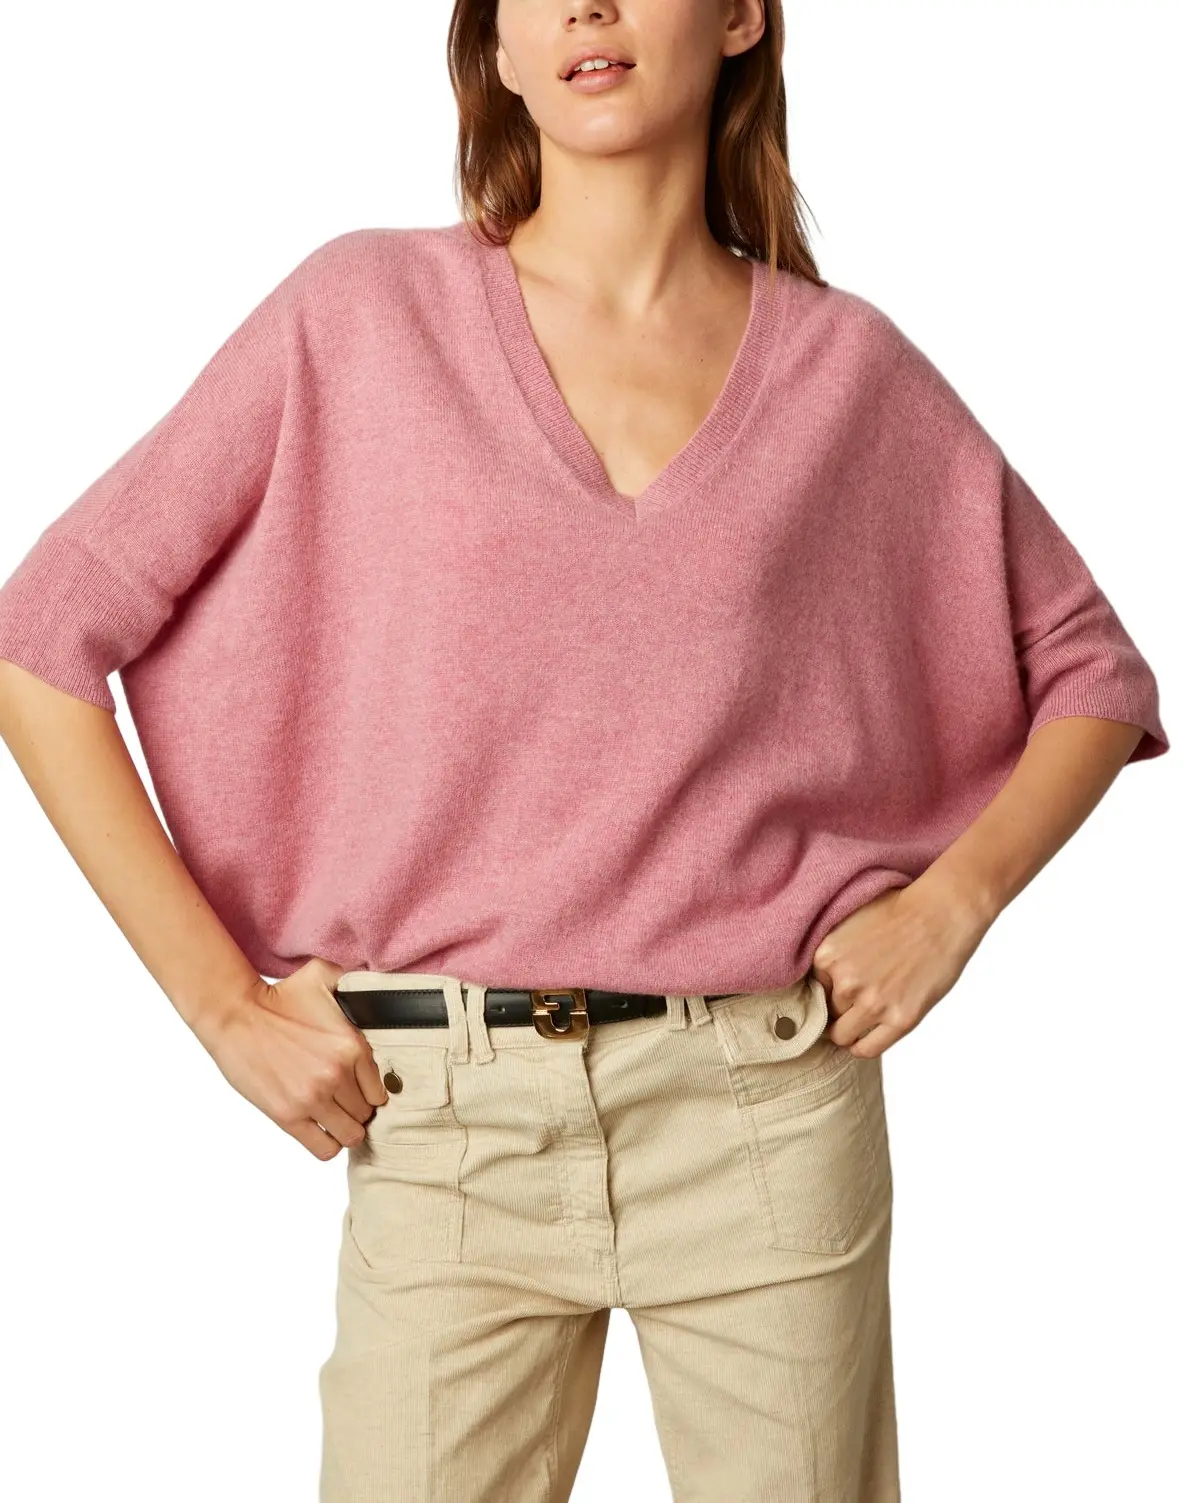 HDGD24002 Loose Fit Plain Fabric Dropped Sleeves V-Neck Short Sleeves Cashmere Sweater With A Tunic Feel